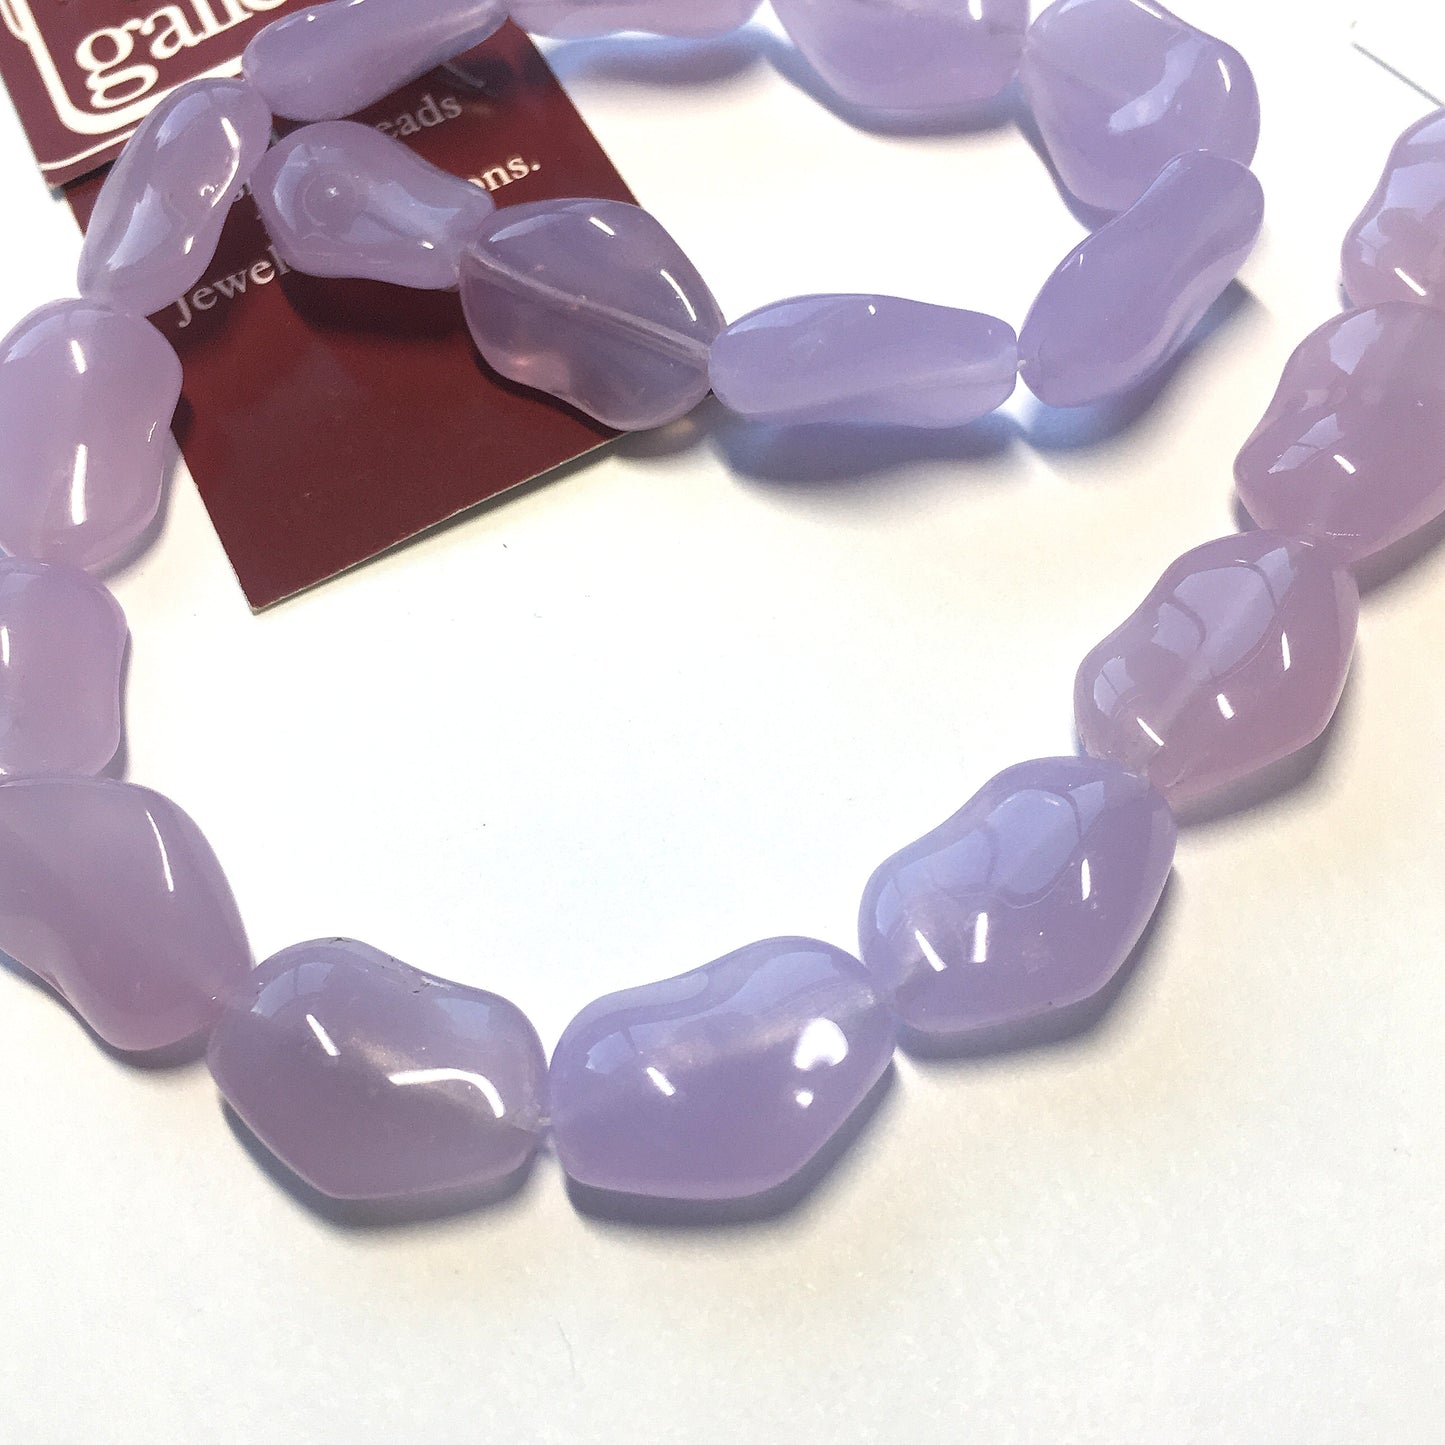 Bead Gallery Amethyst Glass Natural Shape, 12 x 16 mm - 18 Beads